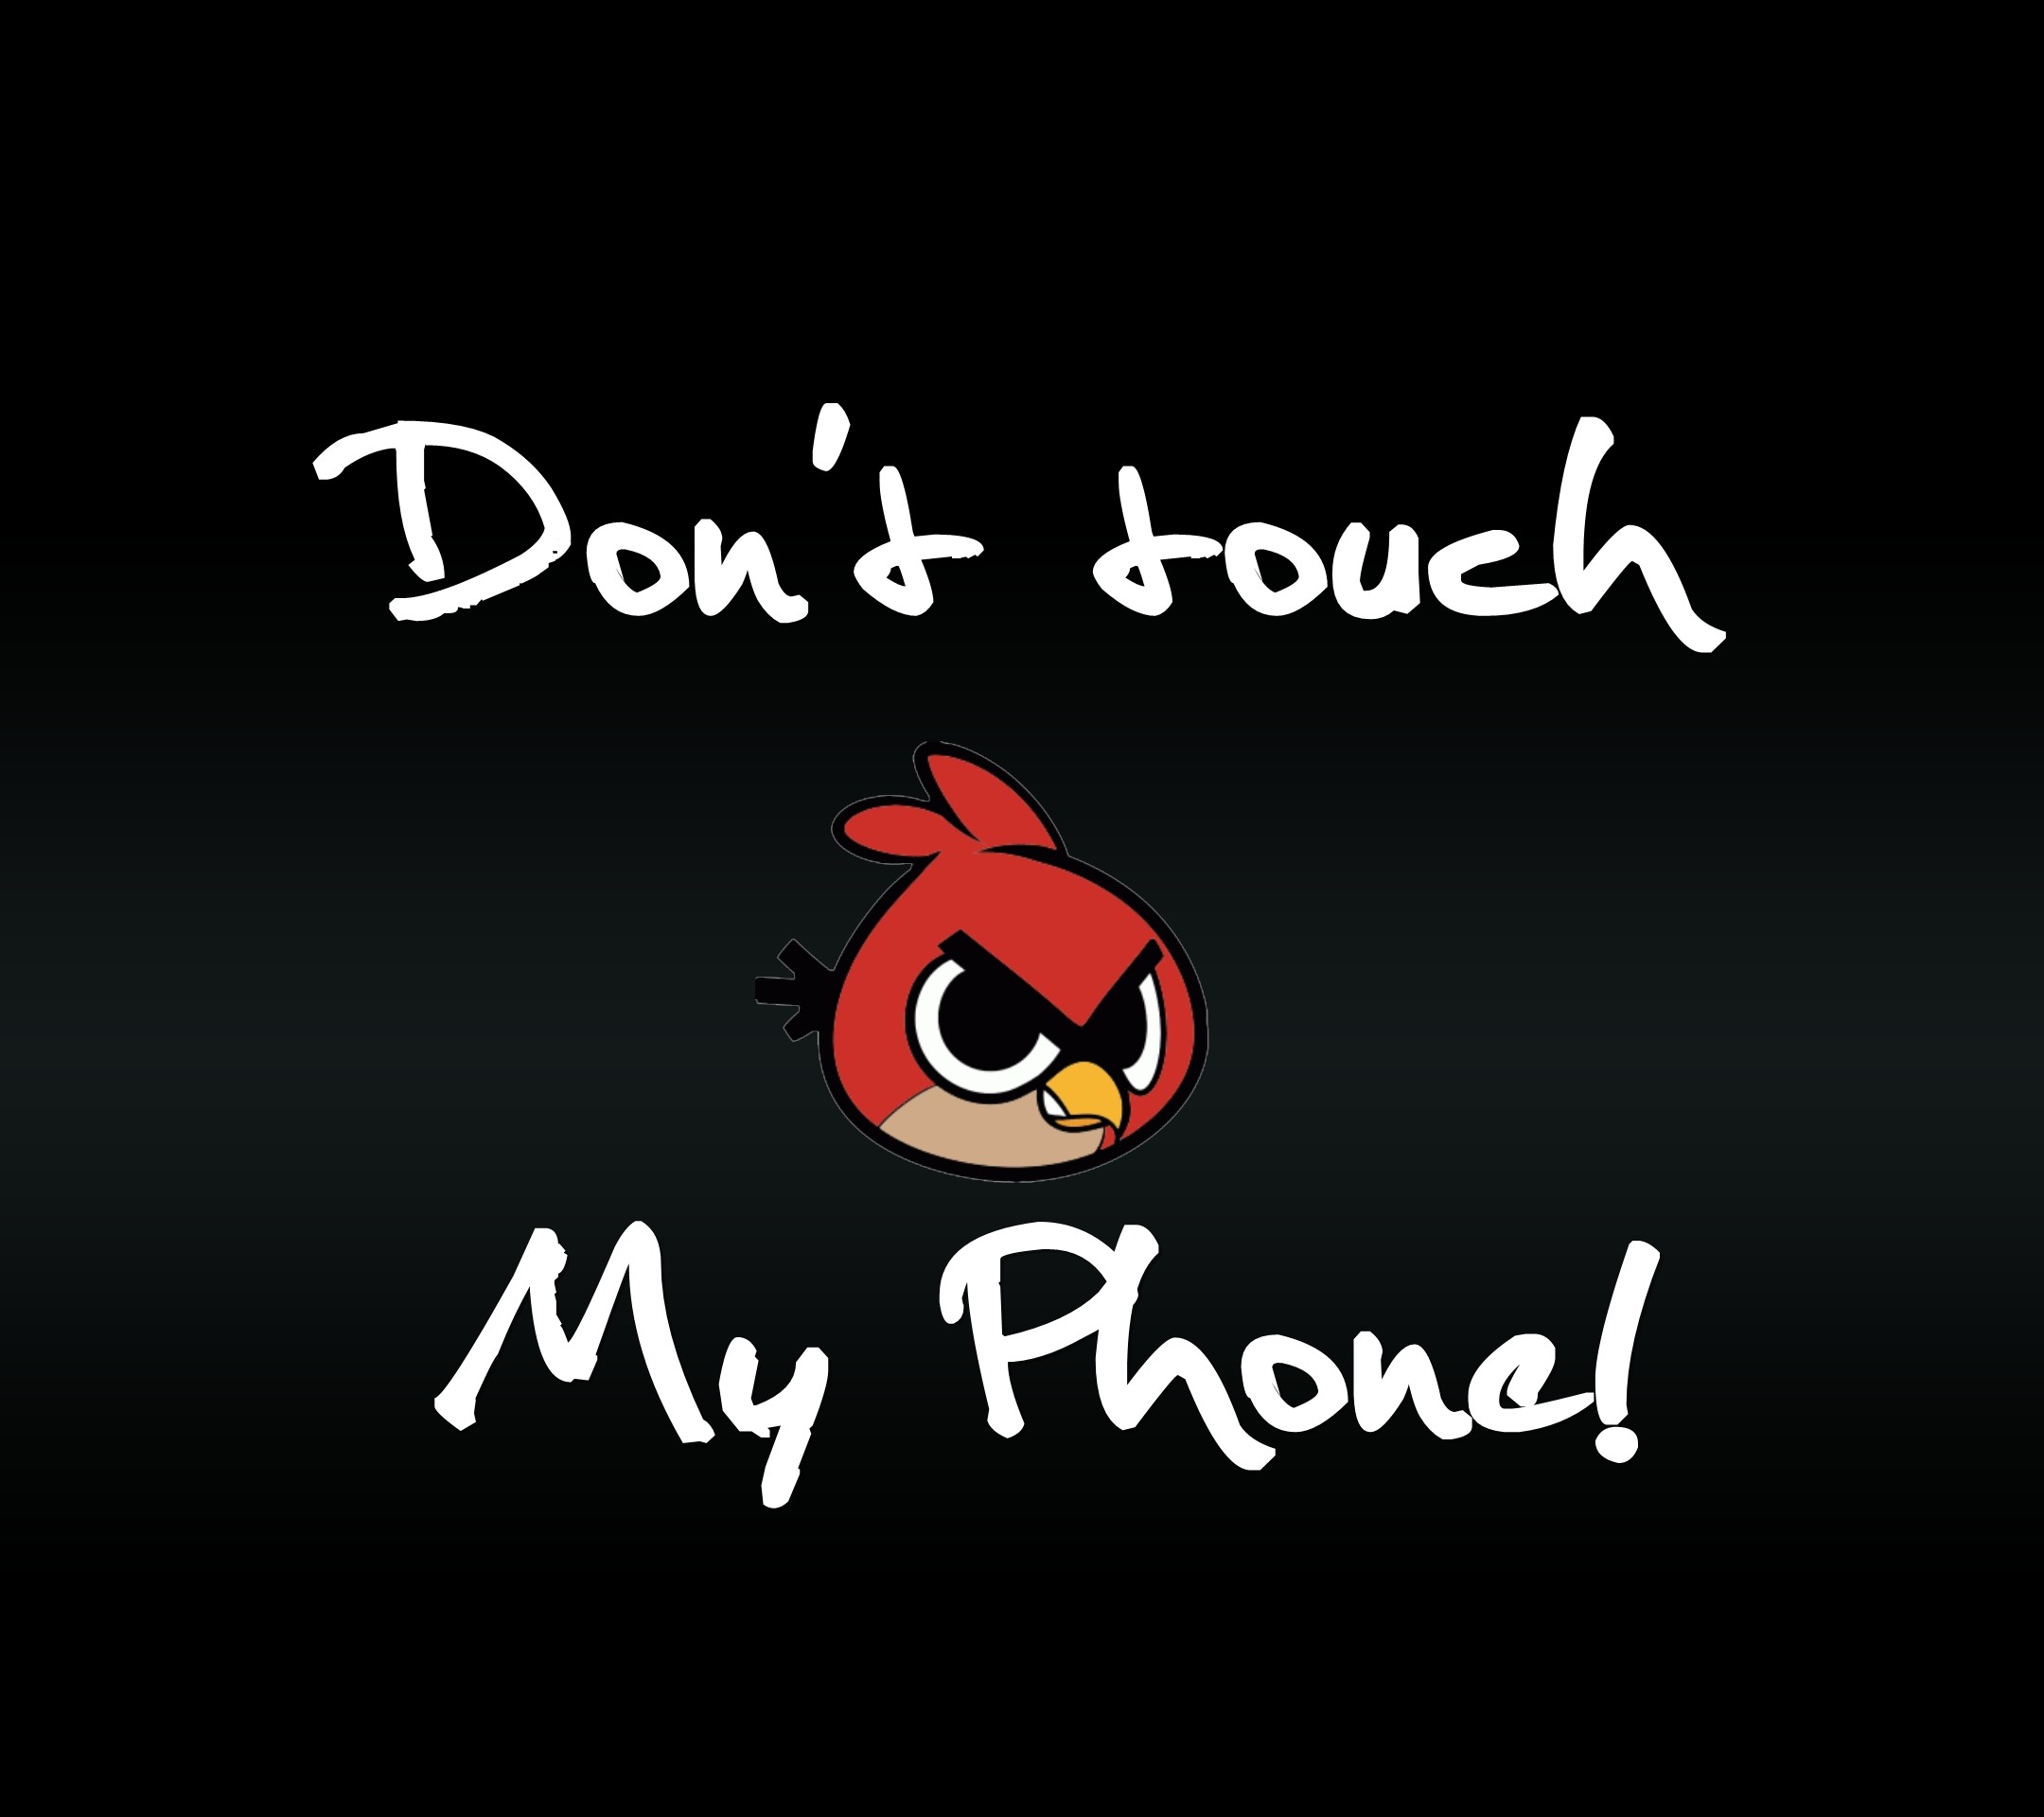 2160x1920 Tap to see more Don't Touch My Phone Android wallpapers, backgrounds, fondos